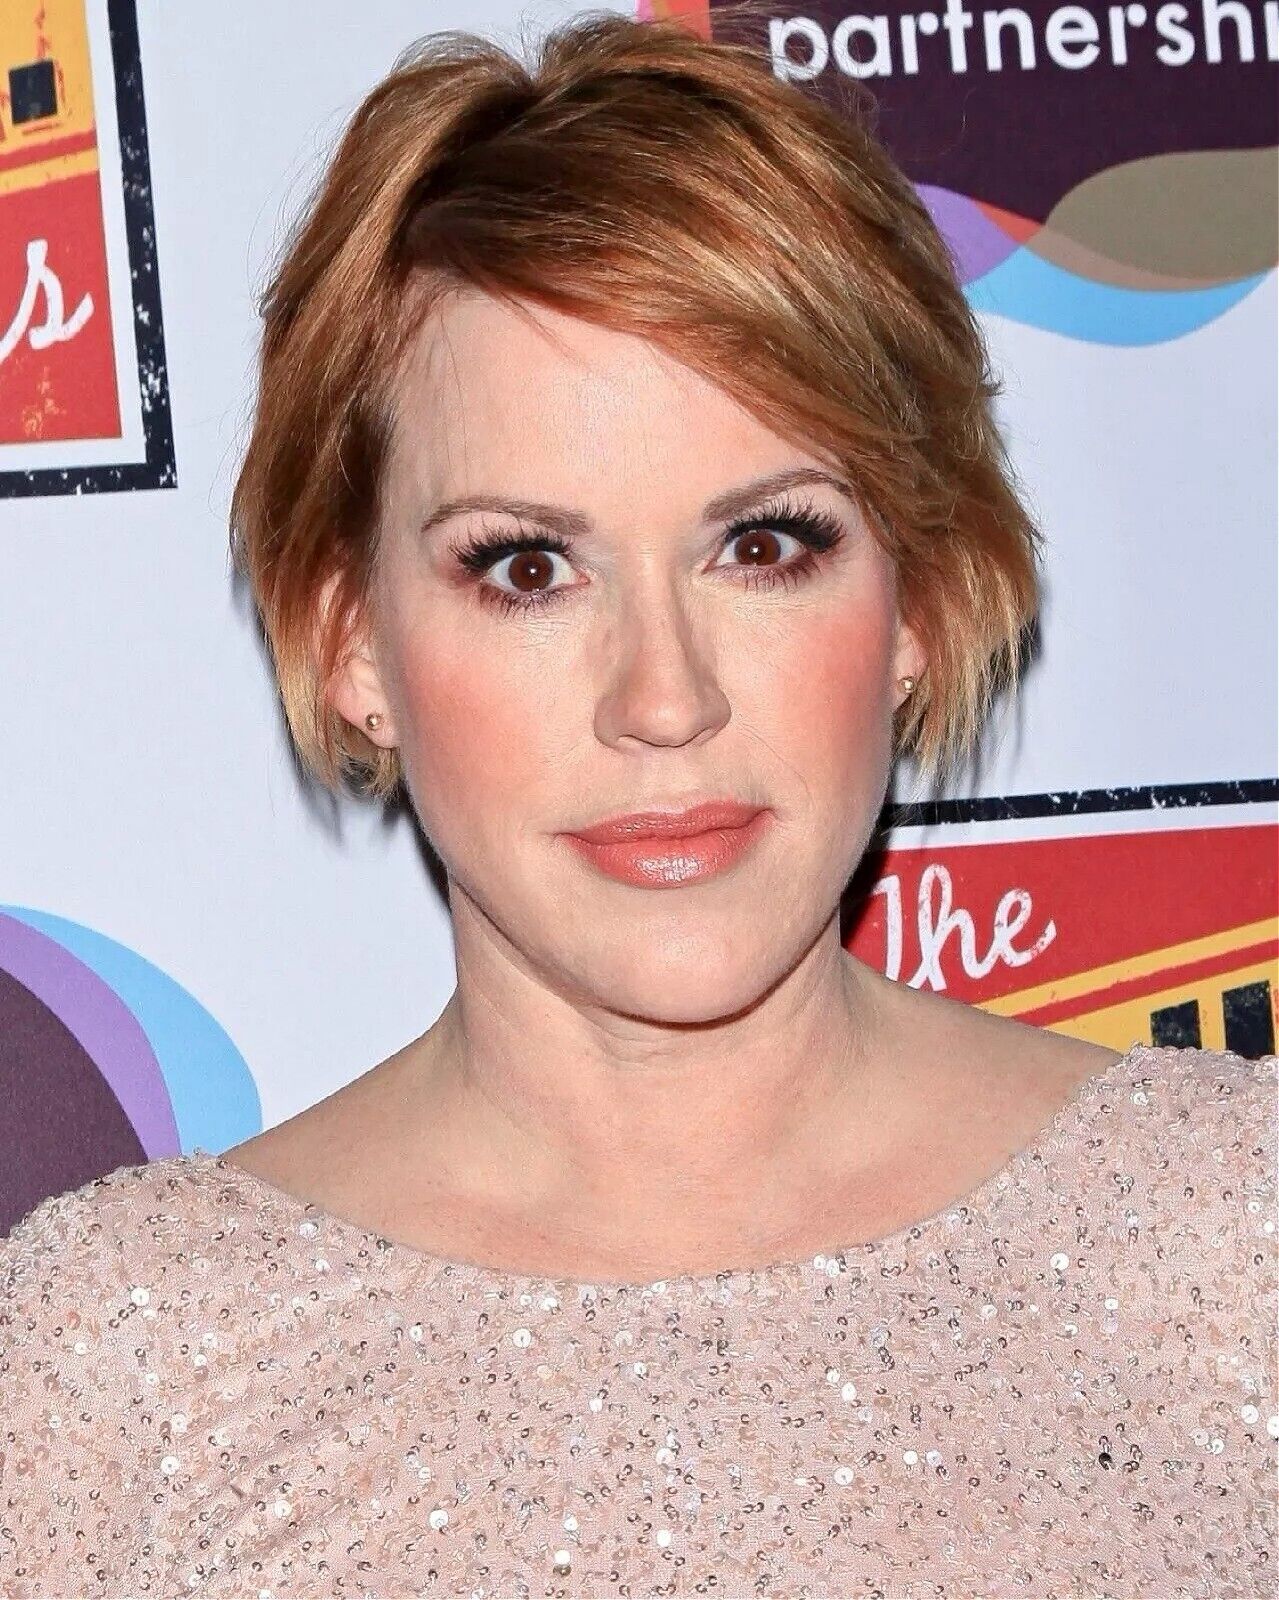 Molly Ringwald 8 x 10 Photograph Art Print Photo Picture